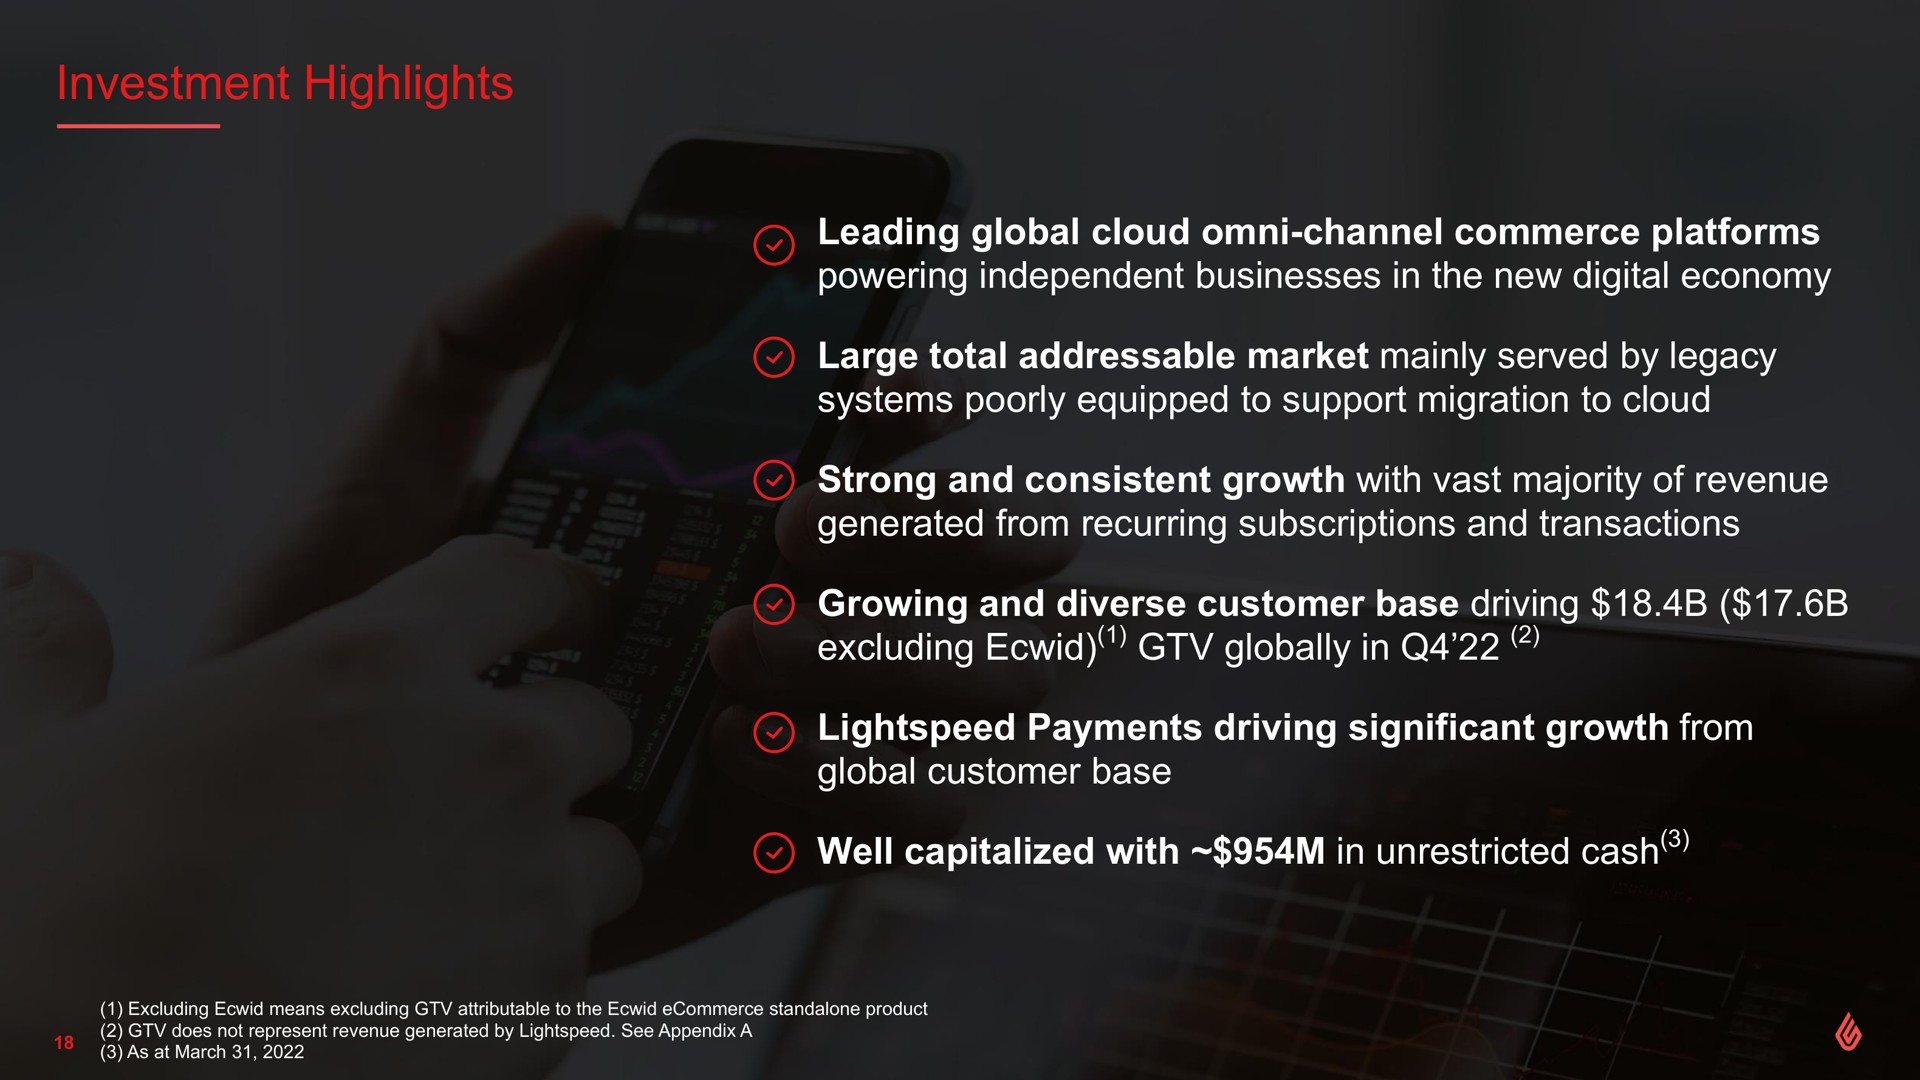 investment highlights leading global cloud channel commerce platforms powering independent businesses in the new digital economy large total market mainly served by legacy systems poorly equipped to support migration to cloud strong and consistent growth with vast majority of revenue generated from recurring subscriptions and transactions growing and diverse customer base driving excluding globally in payments driving significant growth from global customer base well capitalized with in unrestricted cash | Lightspeed